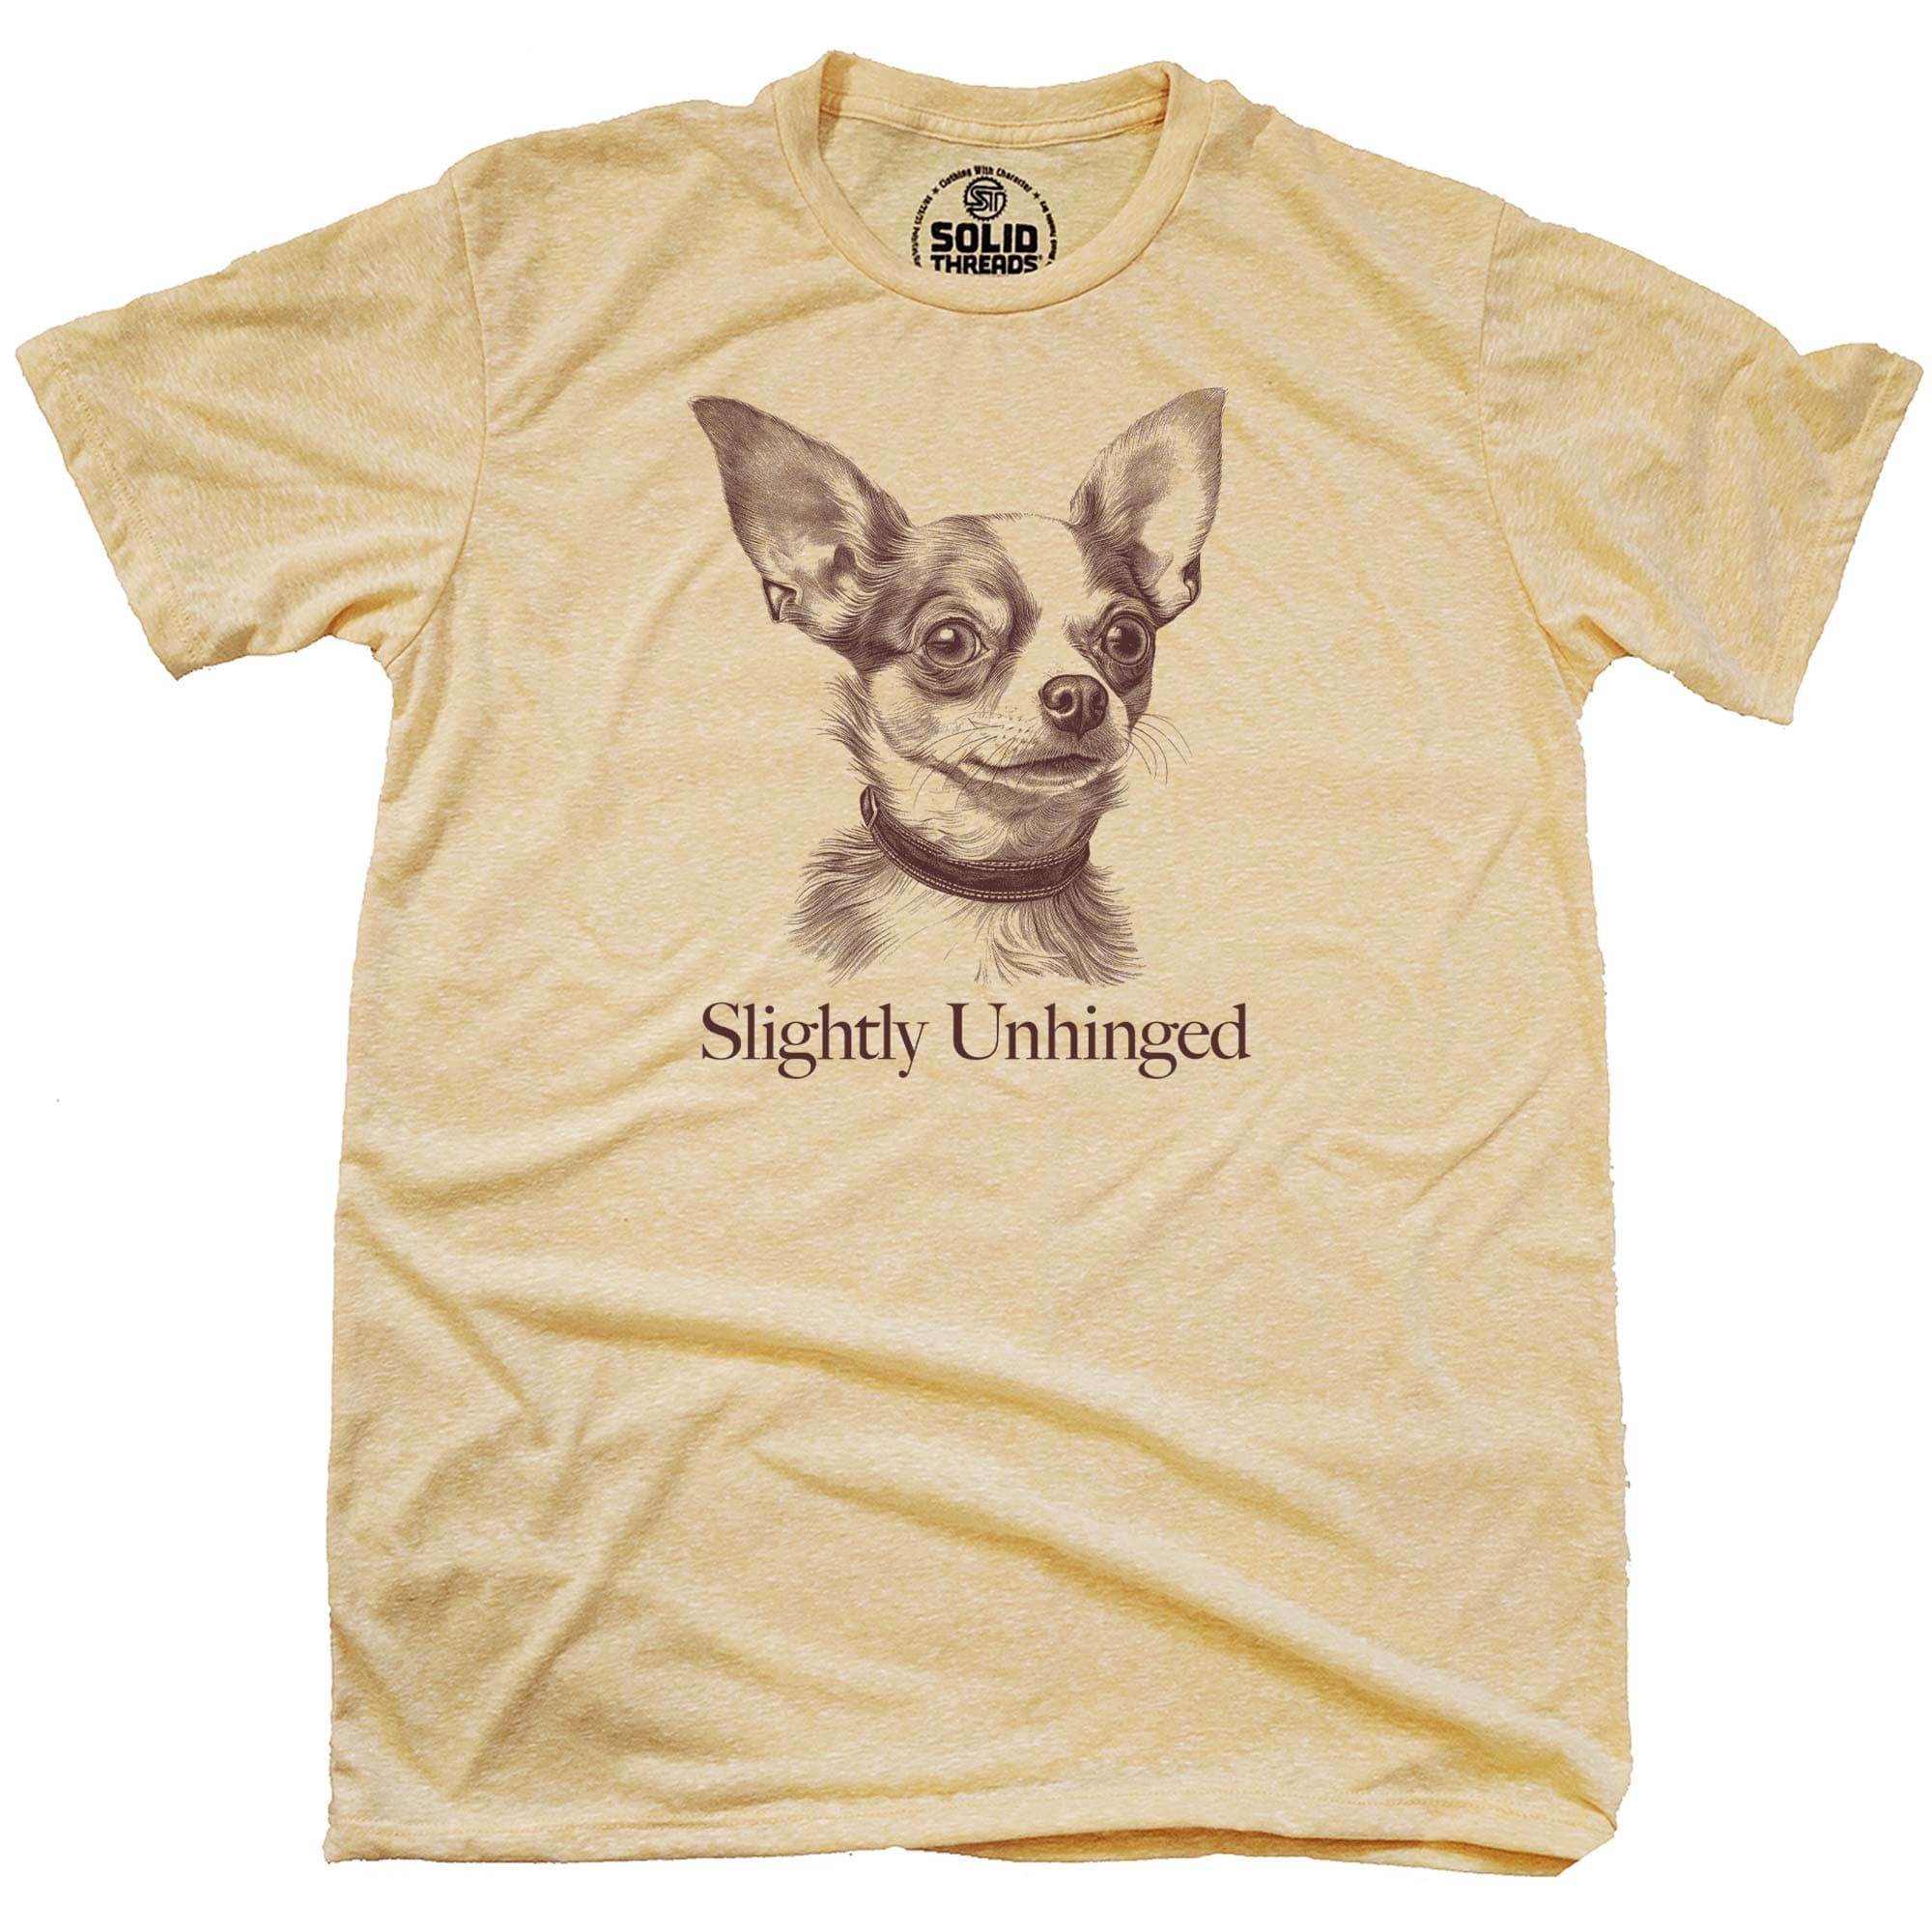 Men's Slightly Unhinged Chihuahua Funny Meme Graphic T-Shirt | Cool Crazy Dog Tee | Solid Threads